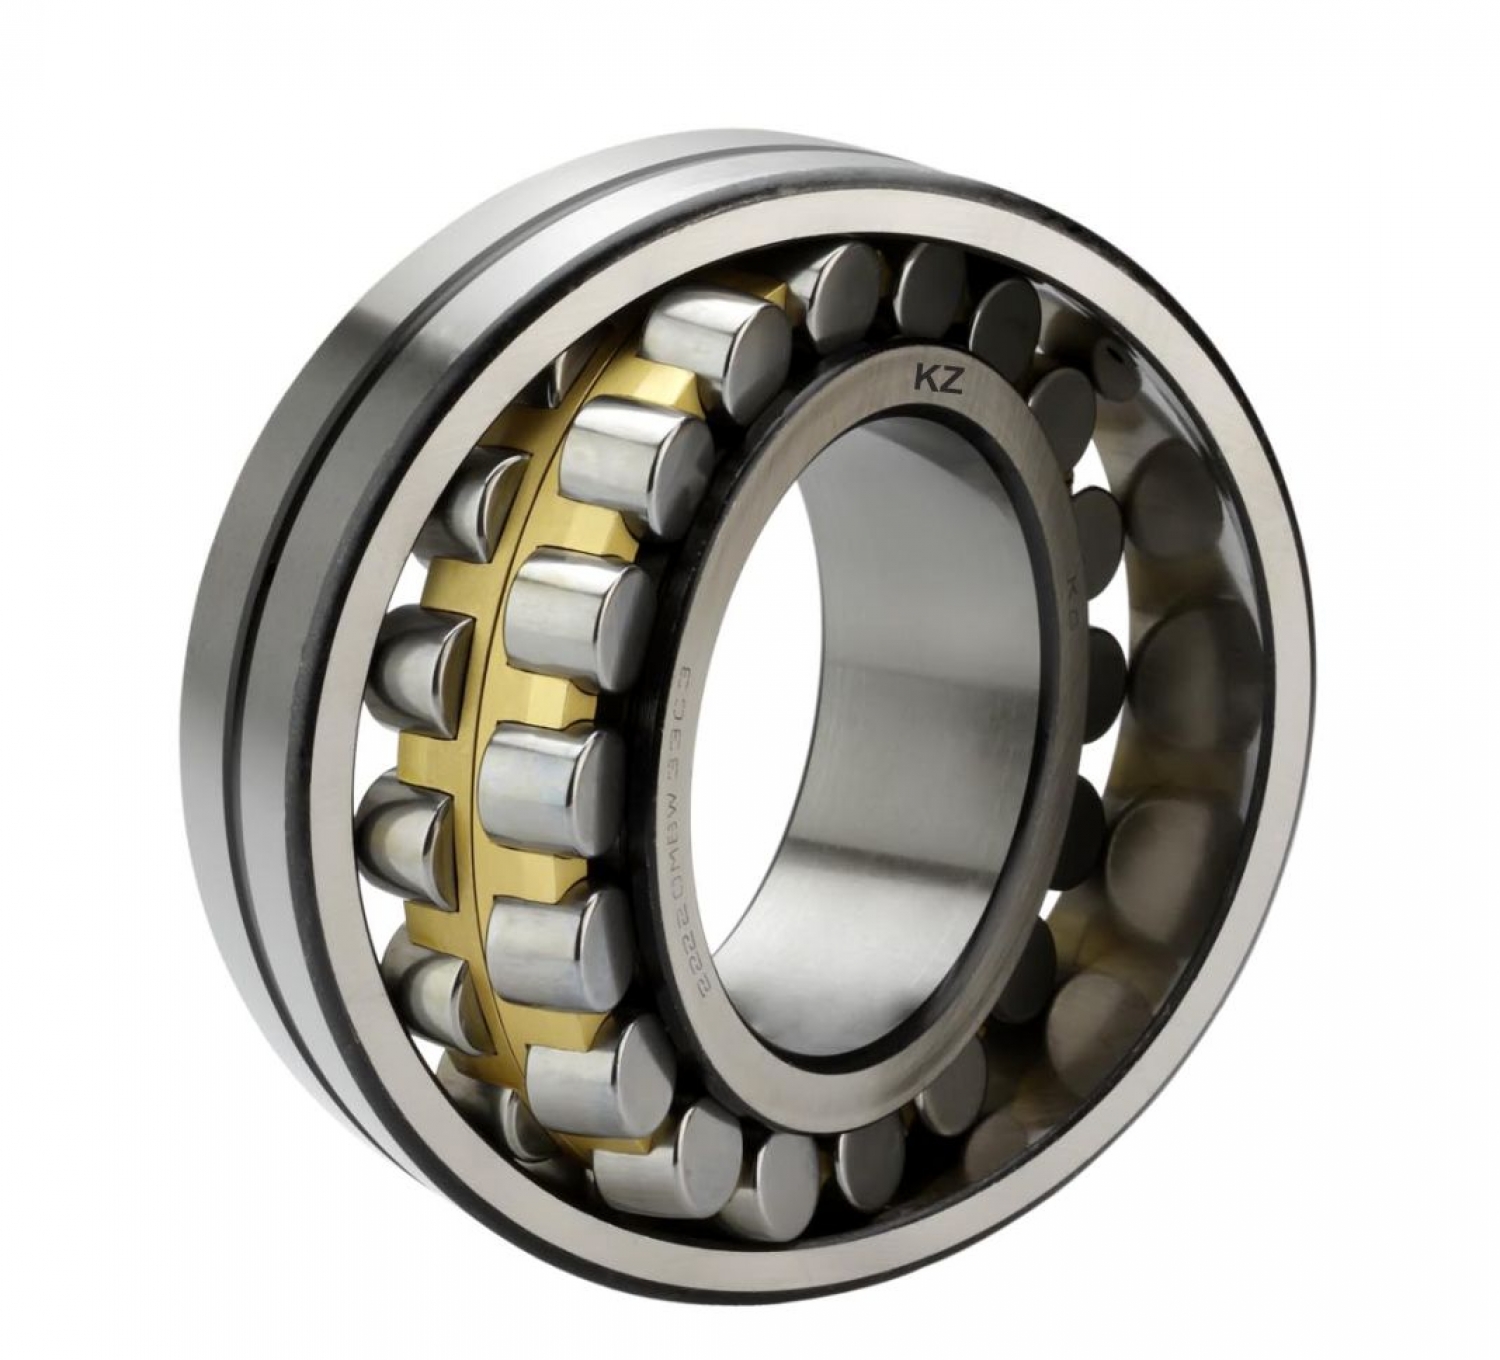 Spherical Roller Bearing - Spherical roller bearings have asymmetrically sphered or barrel shaped rollers. These bearings are suitable for Cement Industry, Mining Sector, Metal Industry etc.